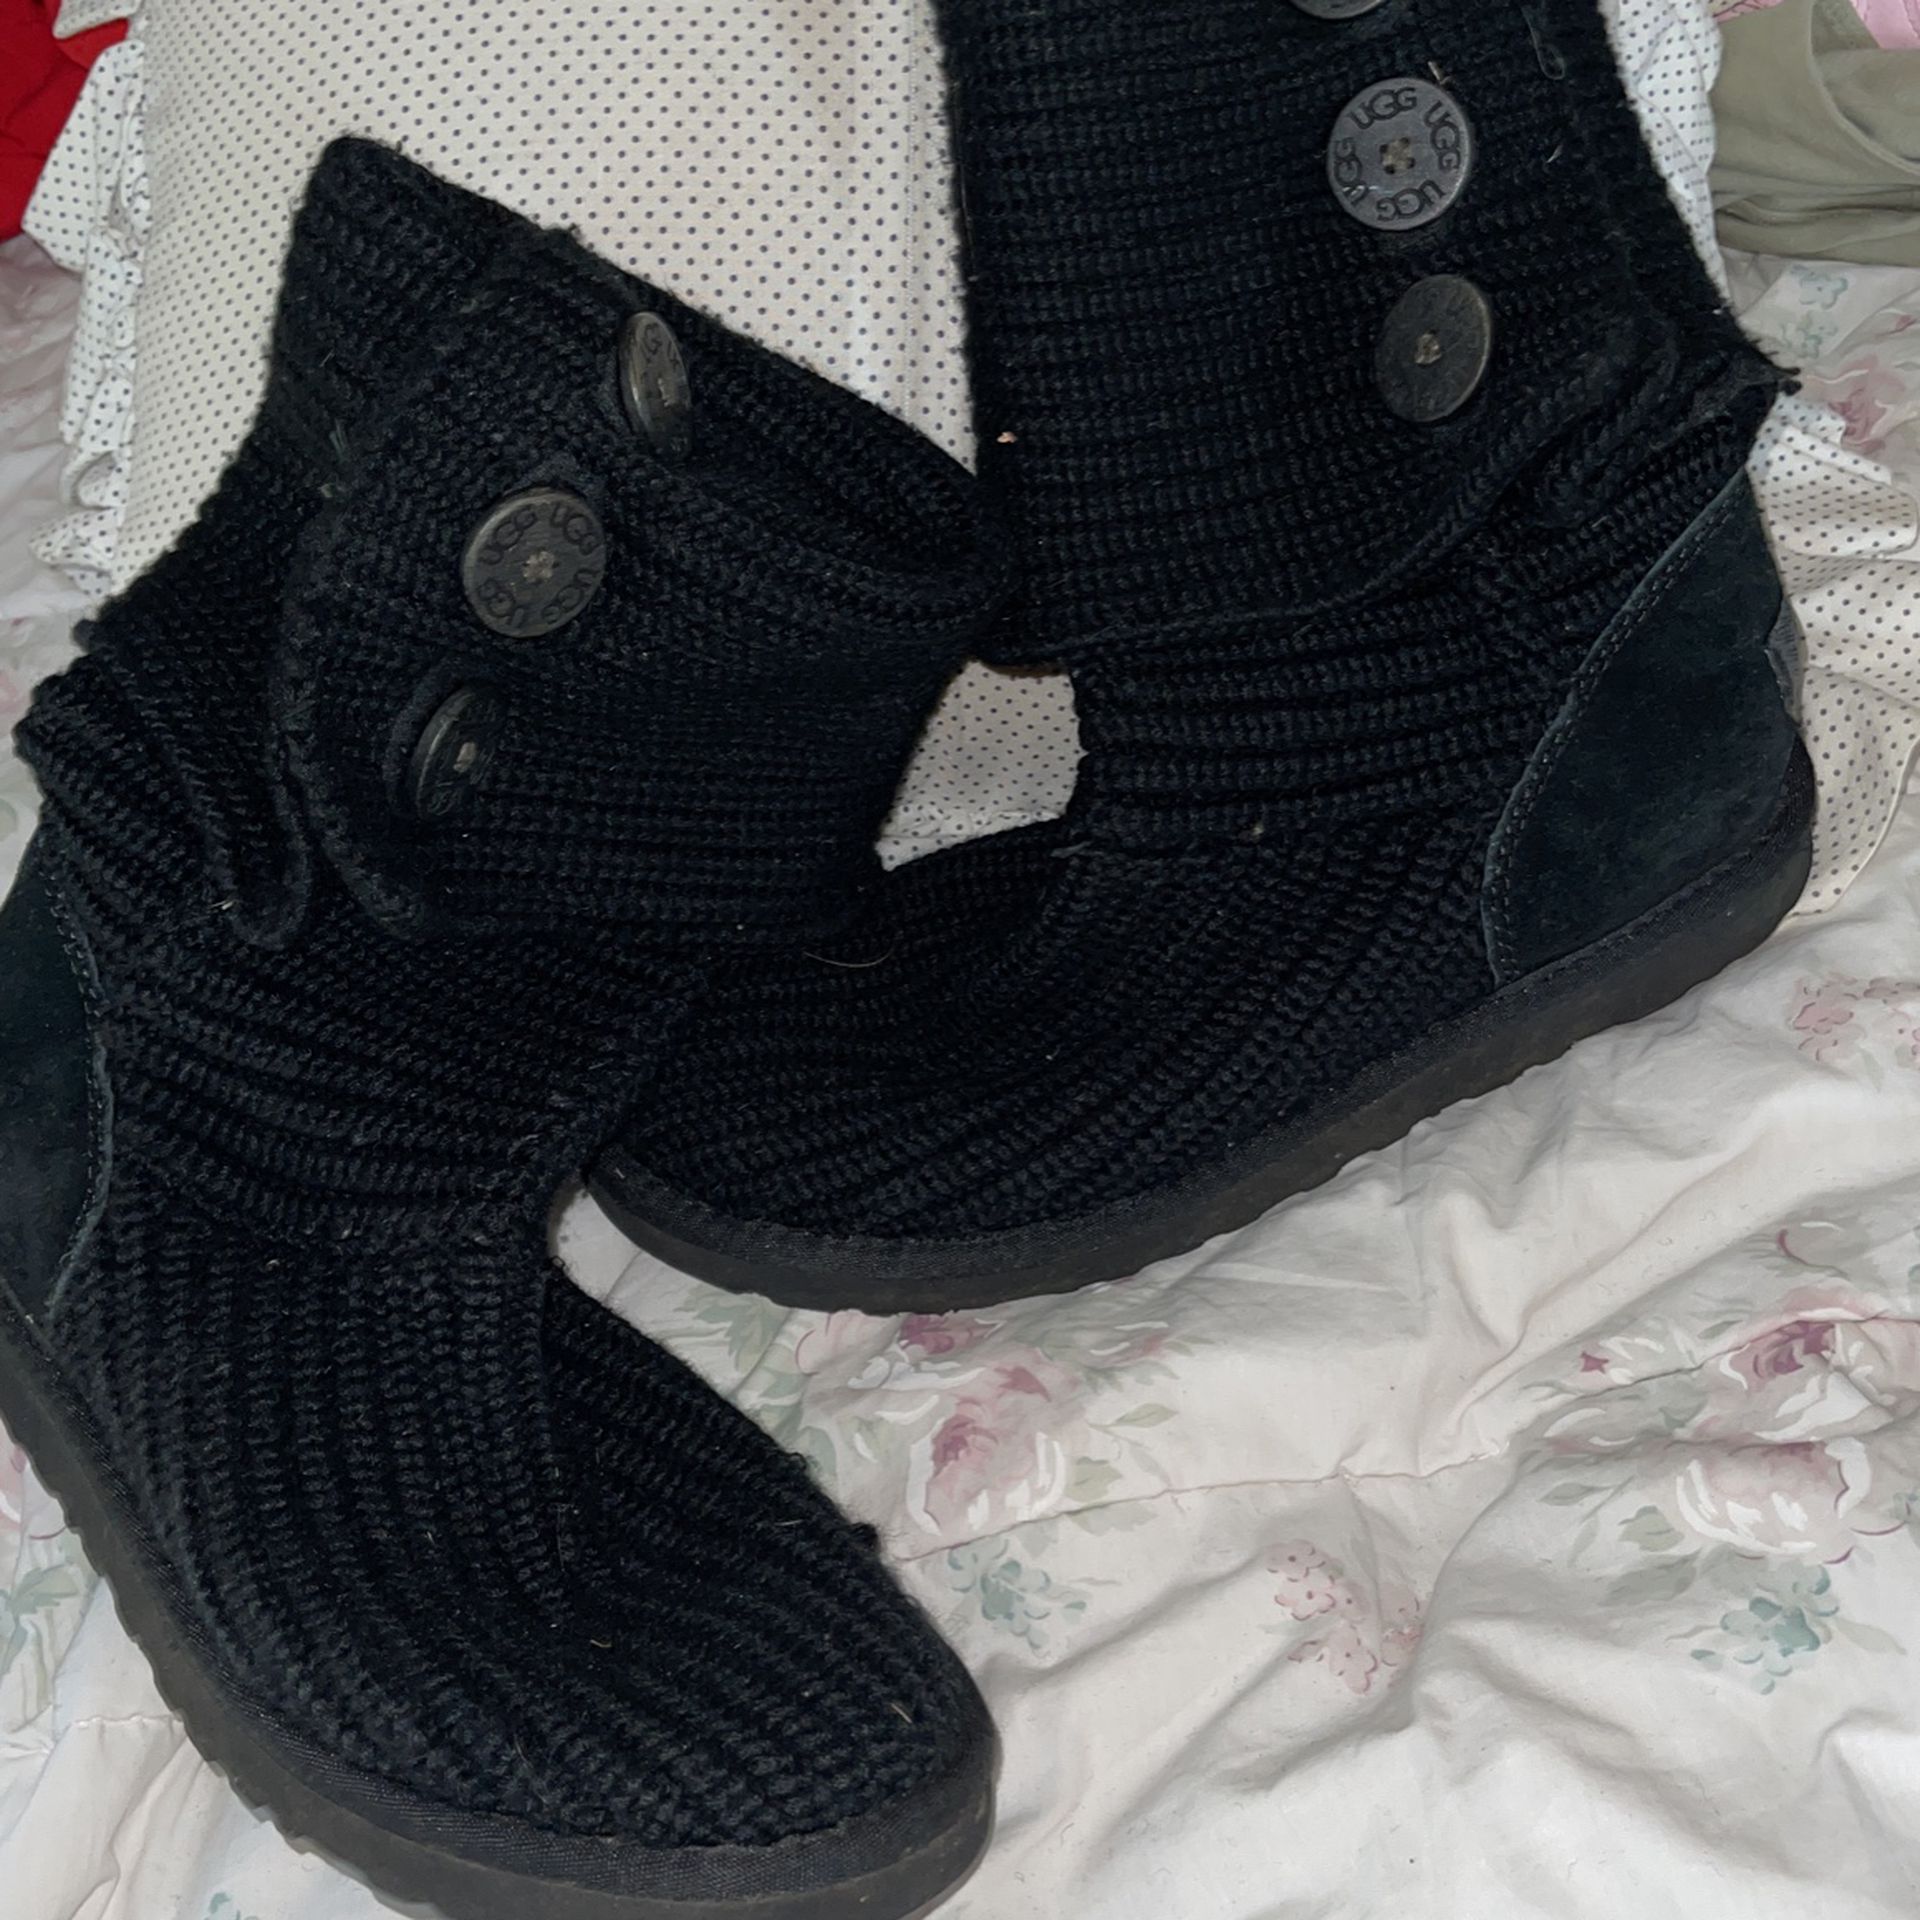 Great Knitting Uggs Boots For Women Size 9 